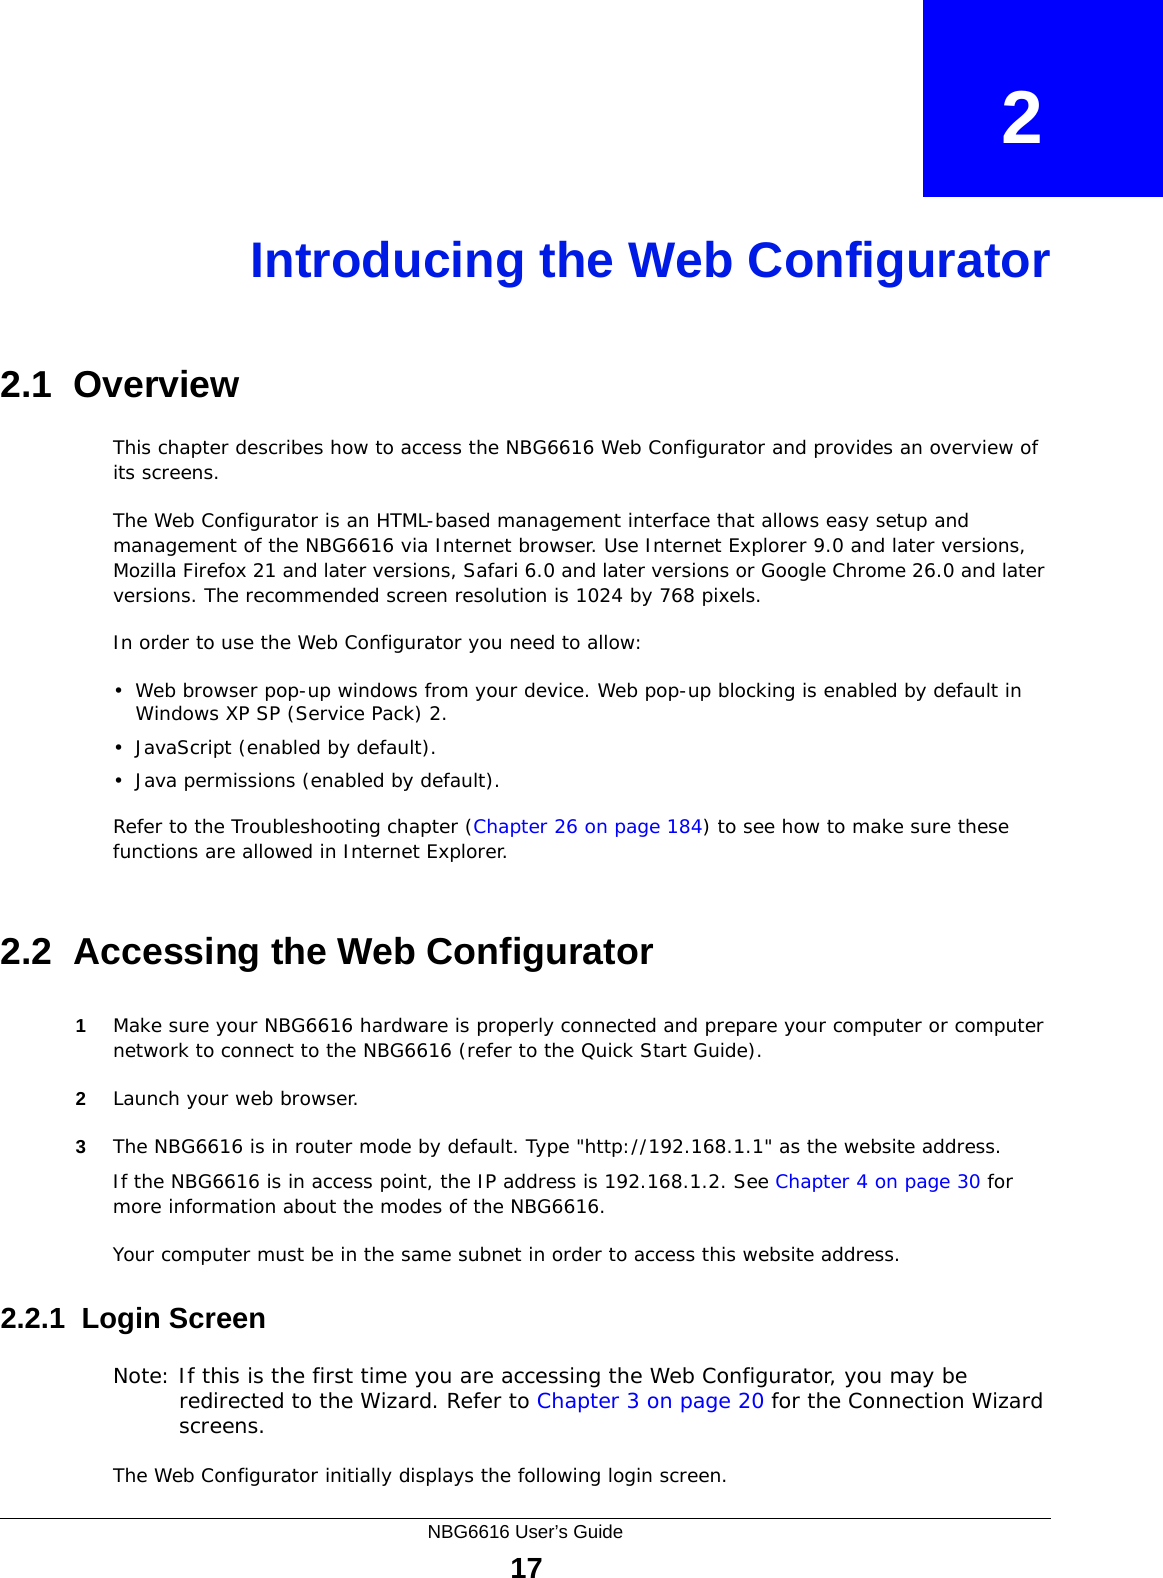 NBG6616 User’s Guide17CHAPTER   2Introducing the Web Configurator2.1  OverviewThis chapter describes how to access the NBG6616 Web Configurator and provides an overview of its screens.The Web Configurator is an HTML-based management interface that allows easy setup and management of the NBG6616 via Internet browser. Use Internet Explorer 9.0 and later versions, Mozilla Firefox 21 and later versions, Safari 6.0 and later versions or Google Chrome 26.0 and later versions. The recommended screen resolution is 1024 by 768 pixels.In order to use the Web Configurator you need to allow:• Web browser pop-up windows from your device. Web pop-up blocking is enabled by default in Windows XP SP (Service Pack) 2.• JavaScript (enabled by default).• Java permissions (enabled by default).Refer to the Troubleshooting chapter (Chapter 26 on page 184) to see how to make sure these functions are allowed in Internet Explorer.2.2  Accessing the Web Configurator1Make sure your NBG6616 hardware is properly connected and prepare your computer or computer network to connect to the NBG6616 (refer to the Quick Start Guide).2Launch your web browser.3The NBG6616 is in router mode by default. Type &quot;http://192.168.1.1&quot; as the website address.If the NBG6616 is in access point, the IP address is 192.168.1.2. See Chapter 4 on page 30 for more information about the modes of the NBG6616.Your computer must be in the same subnet in order to access this website address.2.2.1  Login ScreenNote: If this is the first time you are accessing the Web Configurator, you may be redirected to the Wizard. Refer to Chapter 3 on page 20 for the Connection Wizard screens. The Web Configurator initially displays the following login screen.